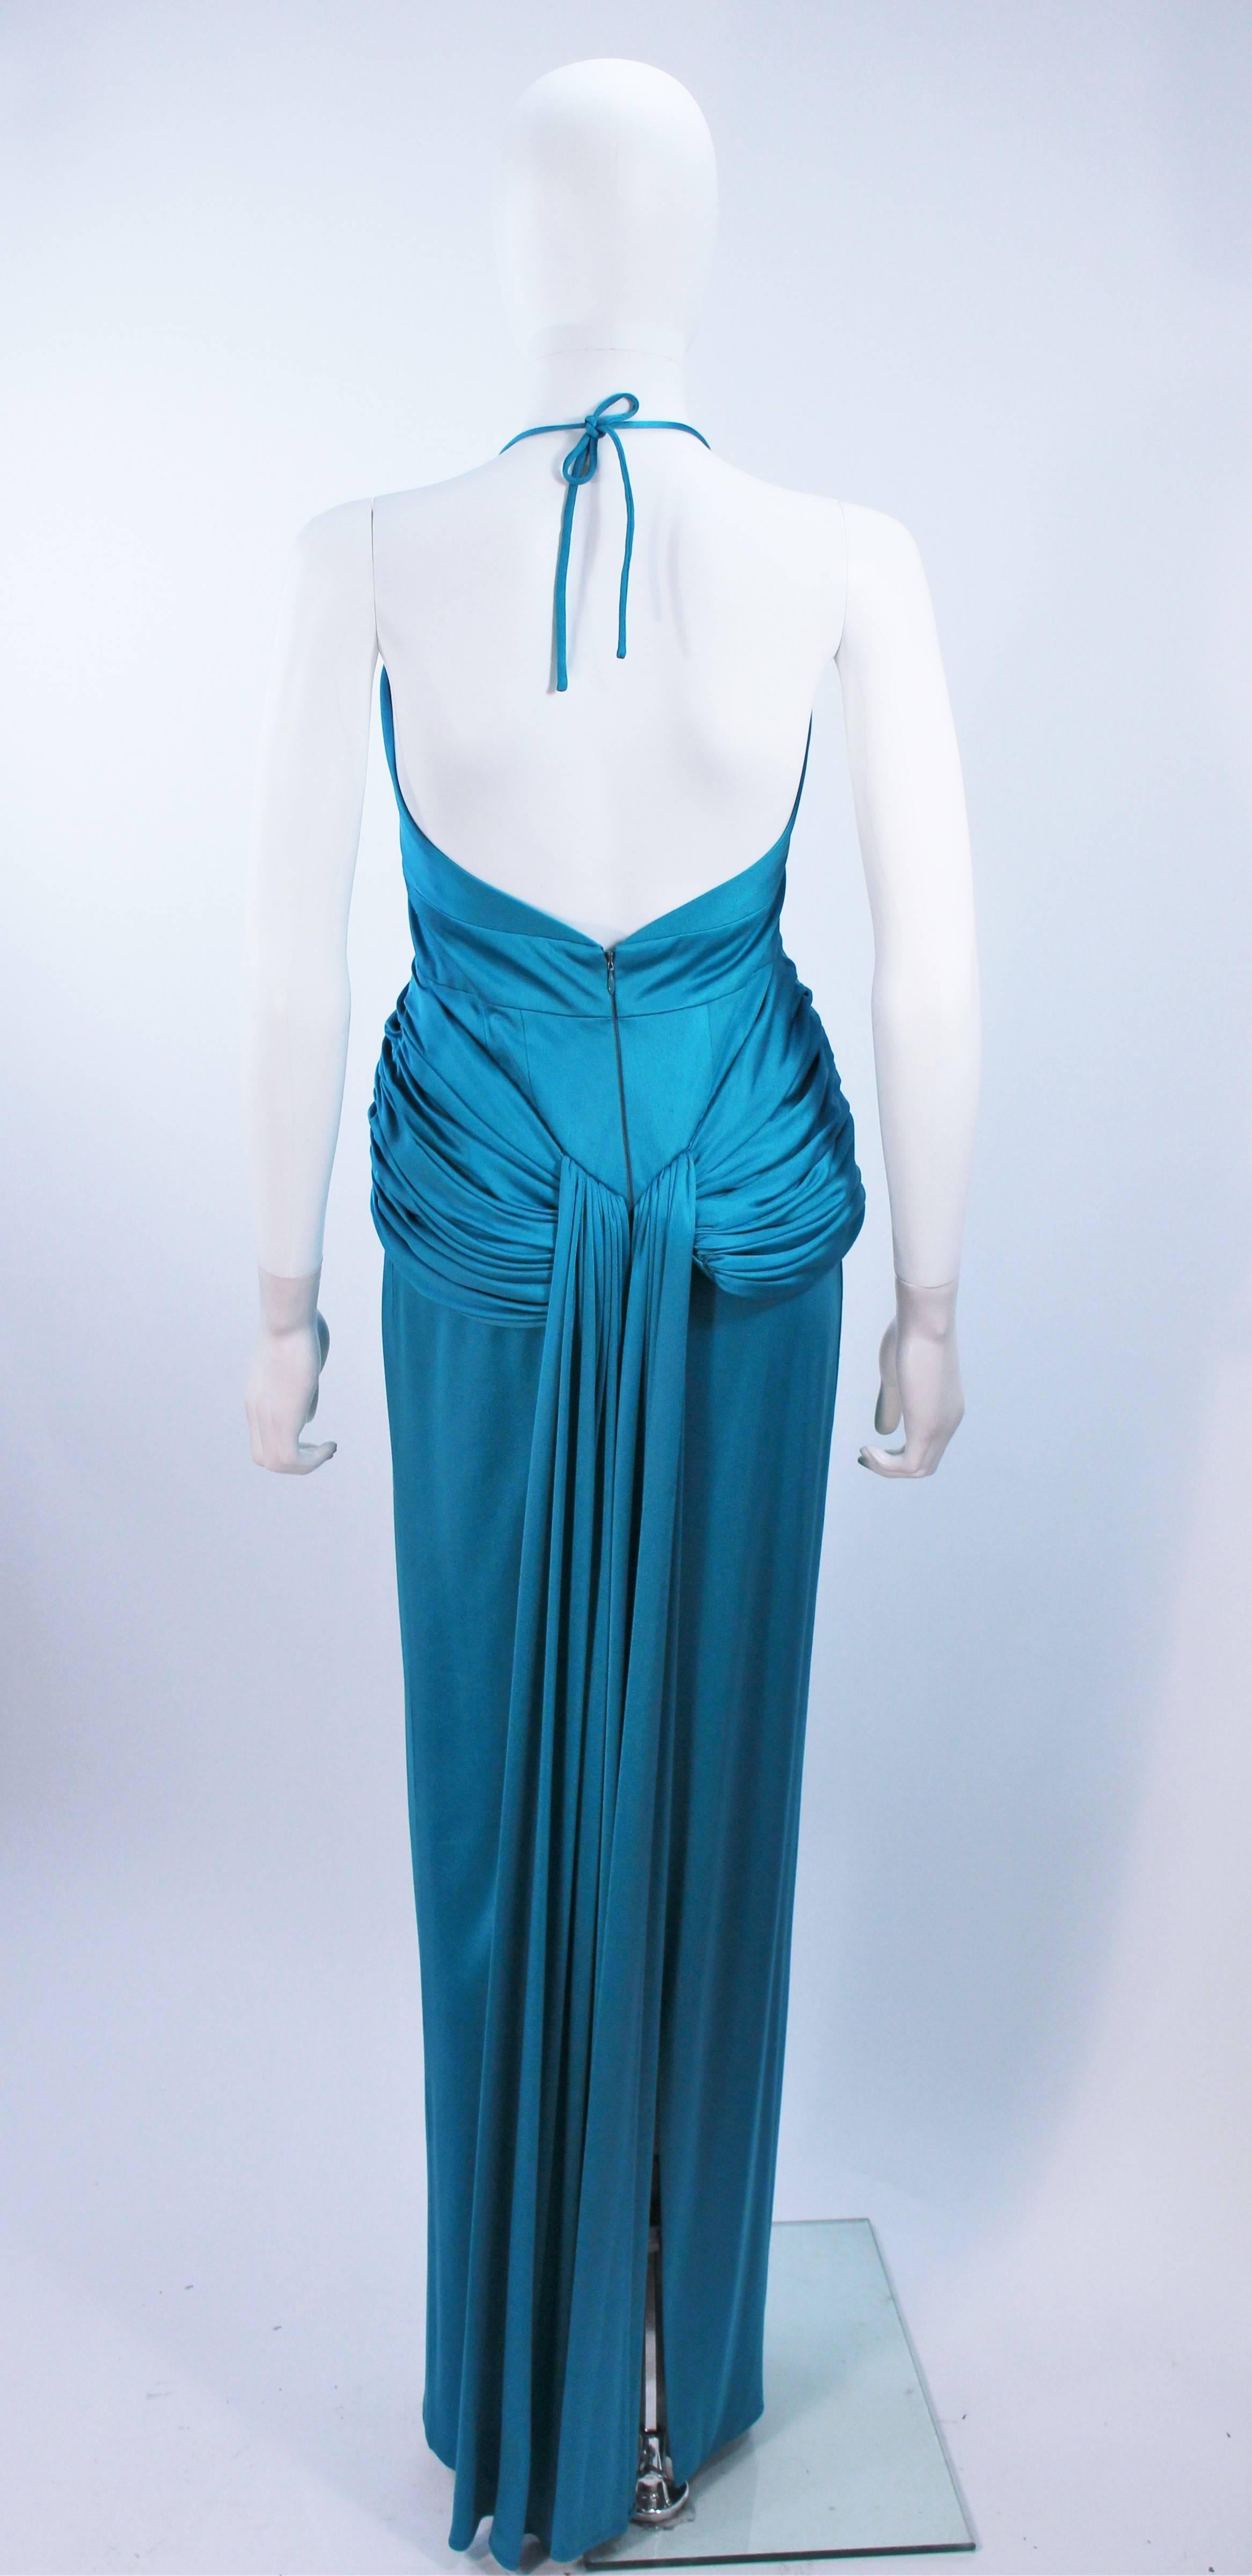 ELIZABETH MASON COUTURE Turquoise Silk Jersey Halter Gown Made to Order For Sale 4